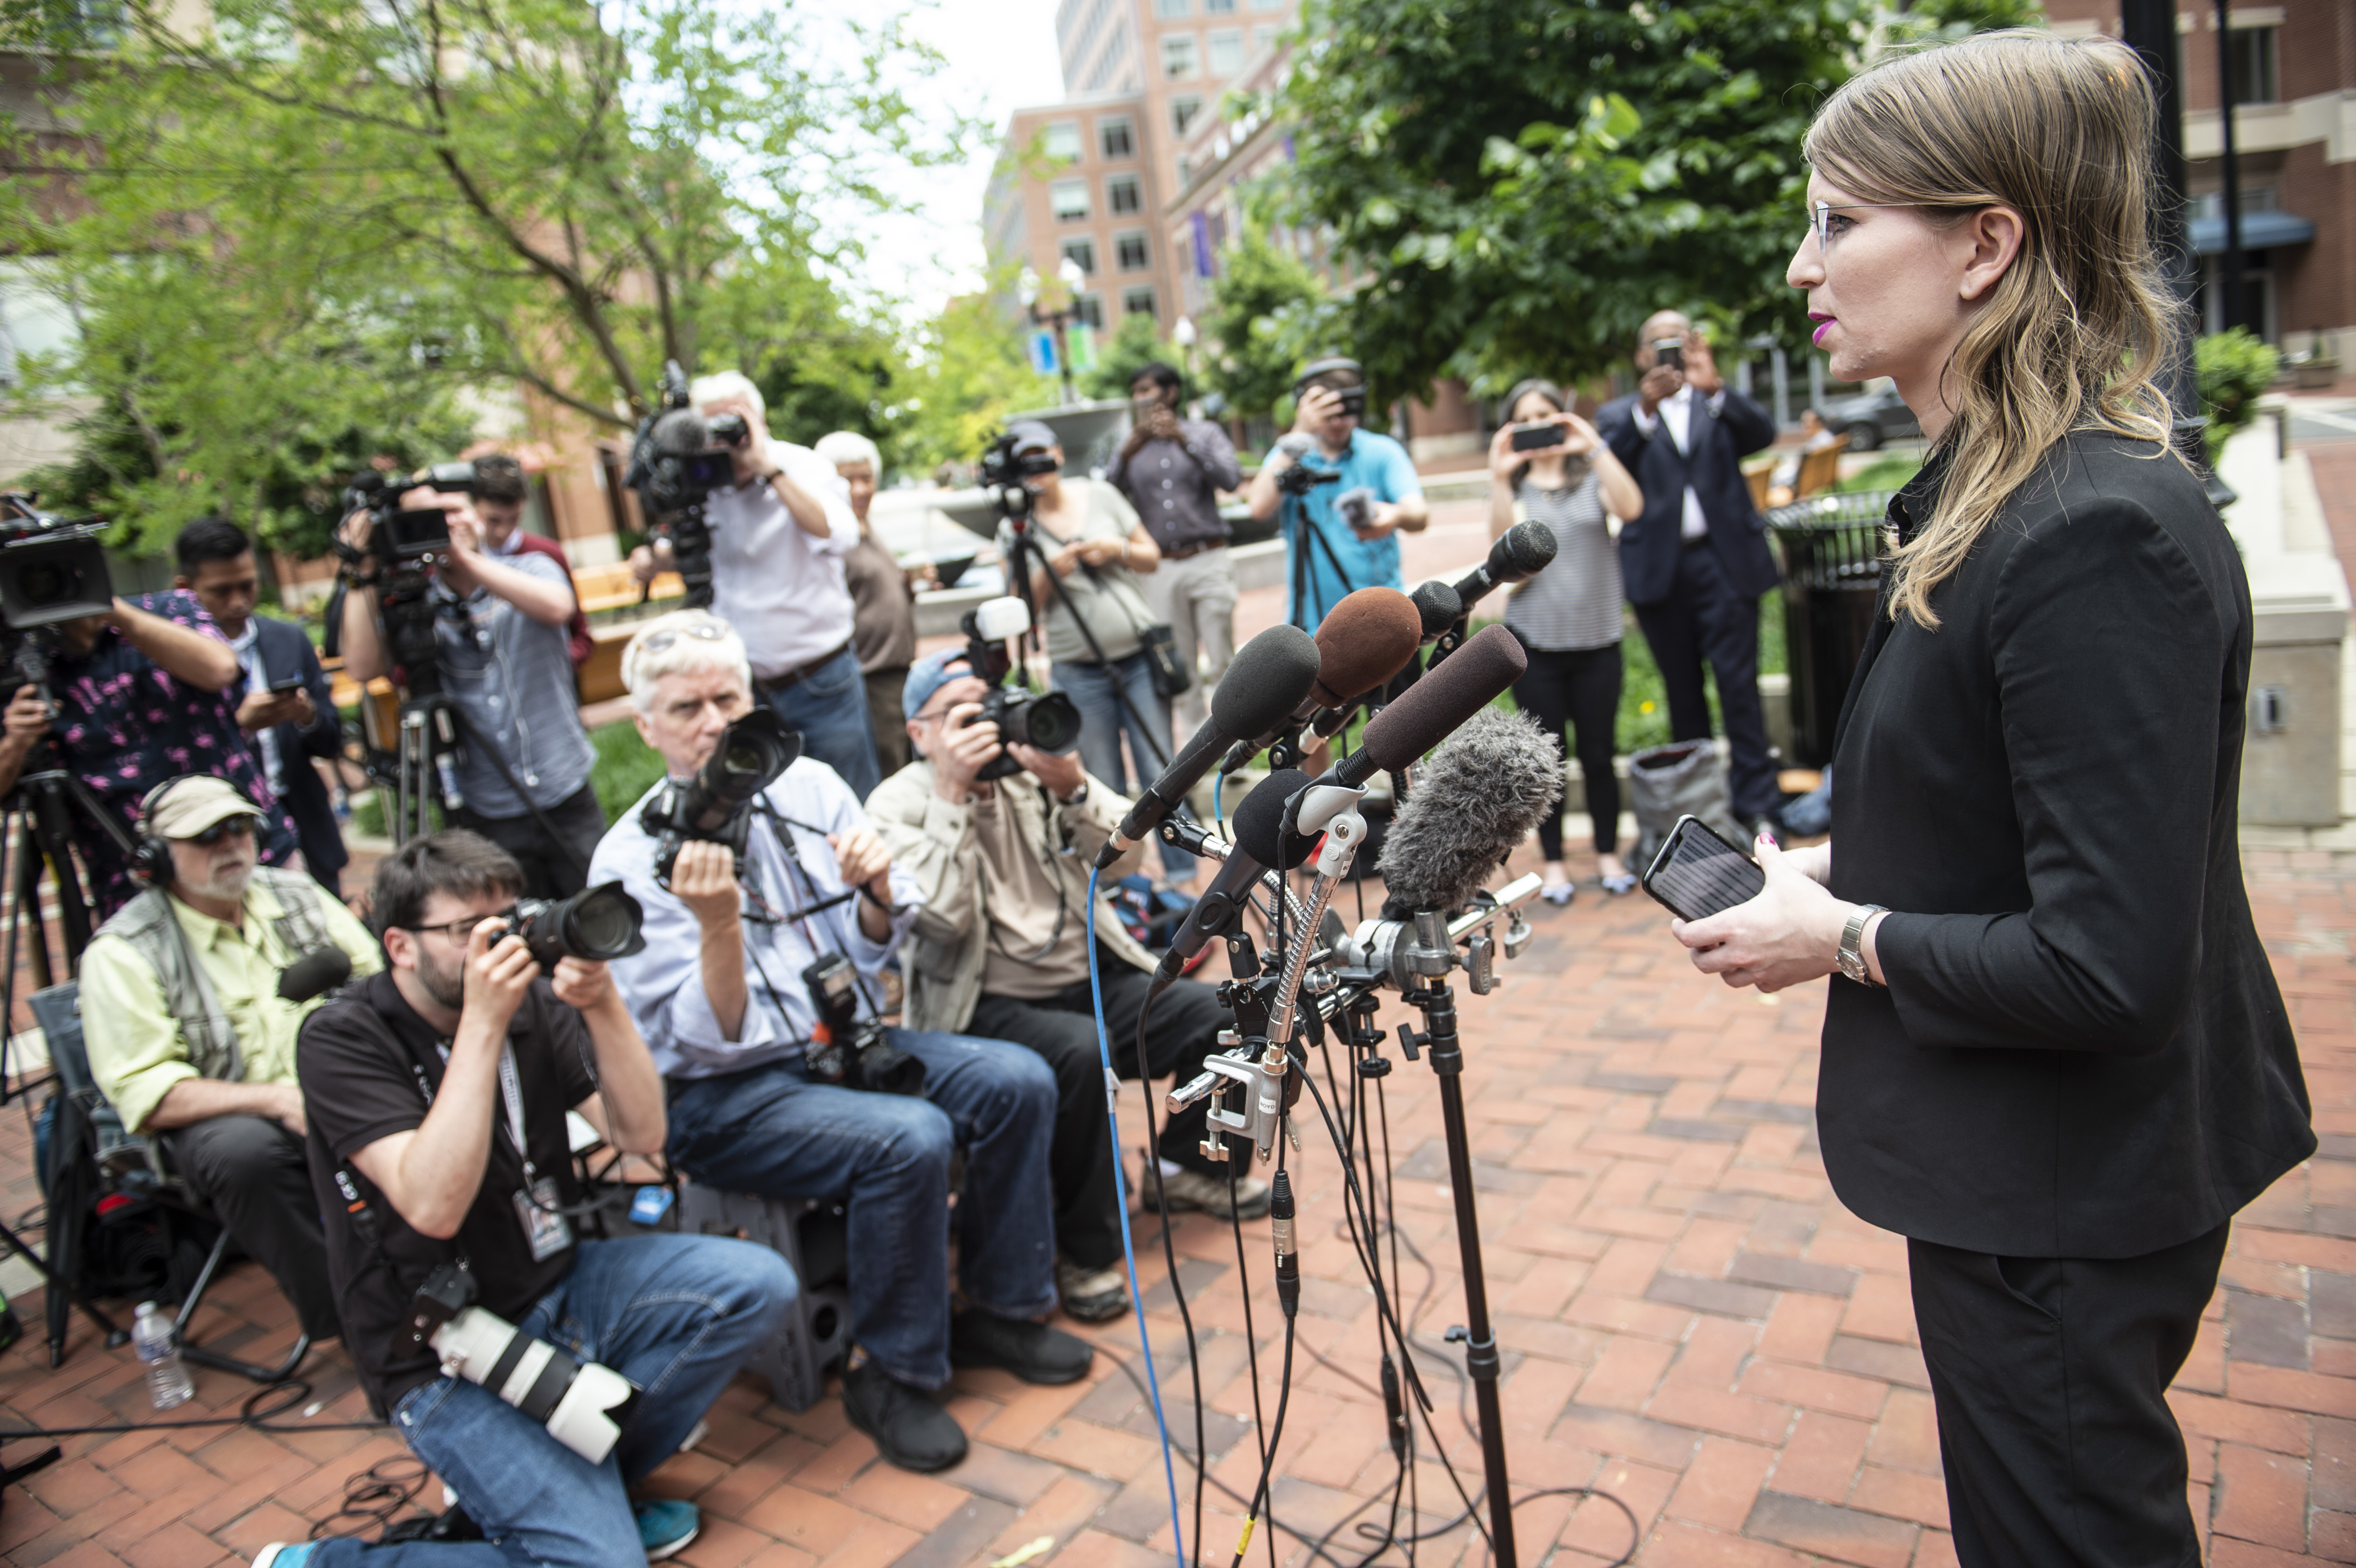 Former military intelligence analyst Chelsea Manning speaks to the press ahead of a Grand Jury appearance about WikiLeaks, in Alexandria, Virginia, on May 16, 2019. (Photo by ERIC BARADAT/AFP/Getty Images)